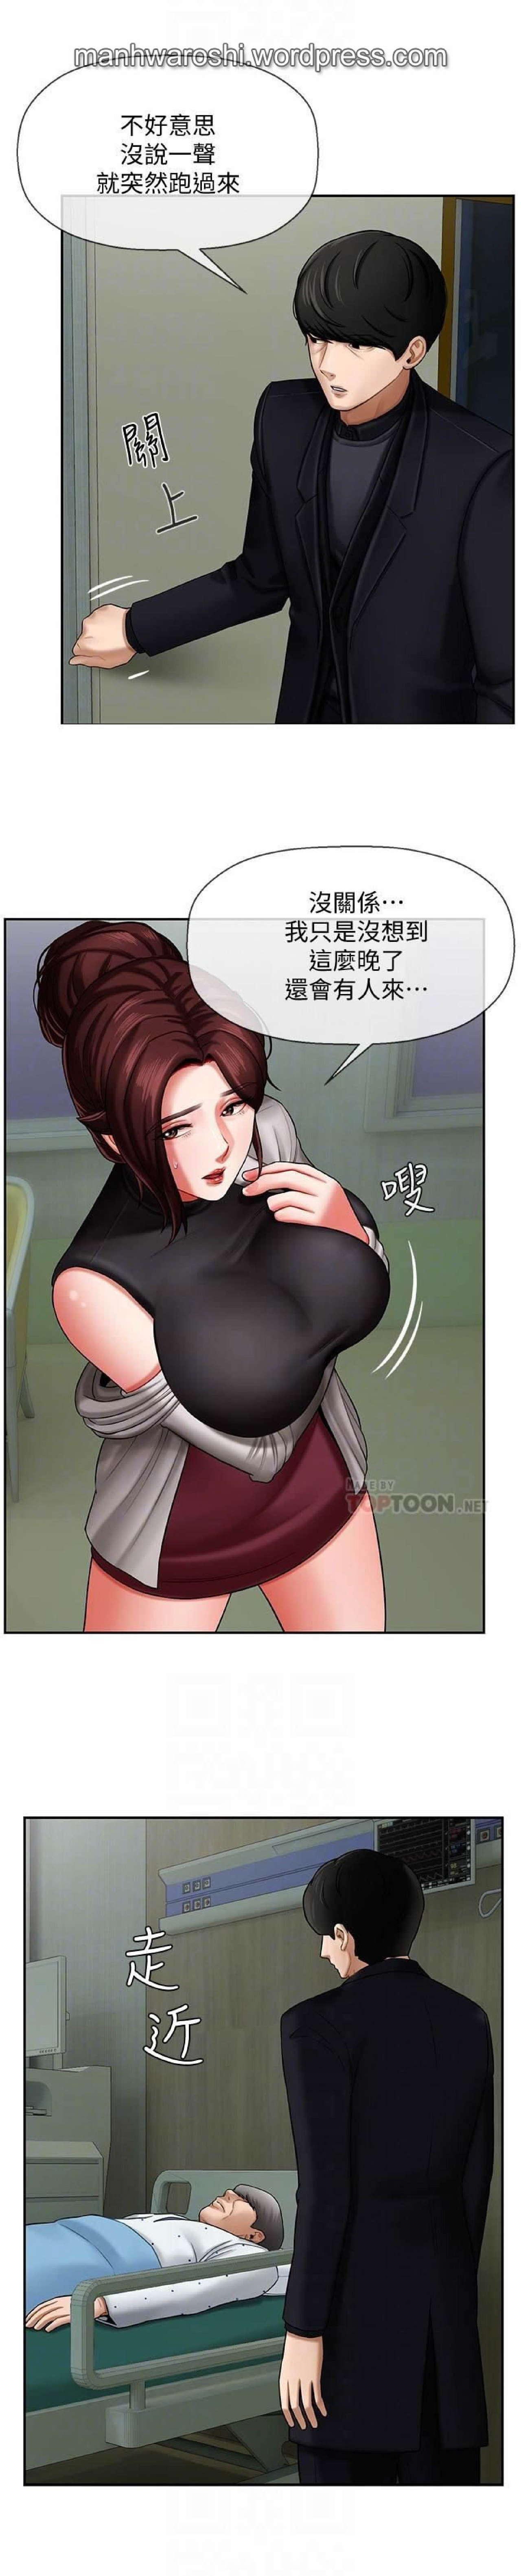 Public Sex 坏老师 | PHYSICAL CLASSROOM 3 Canadian - Page 6